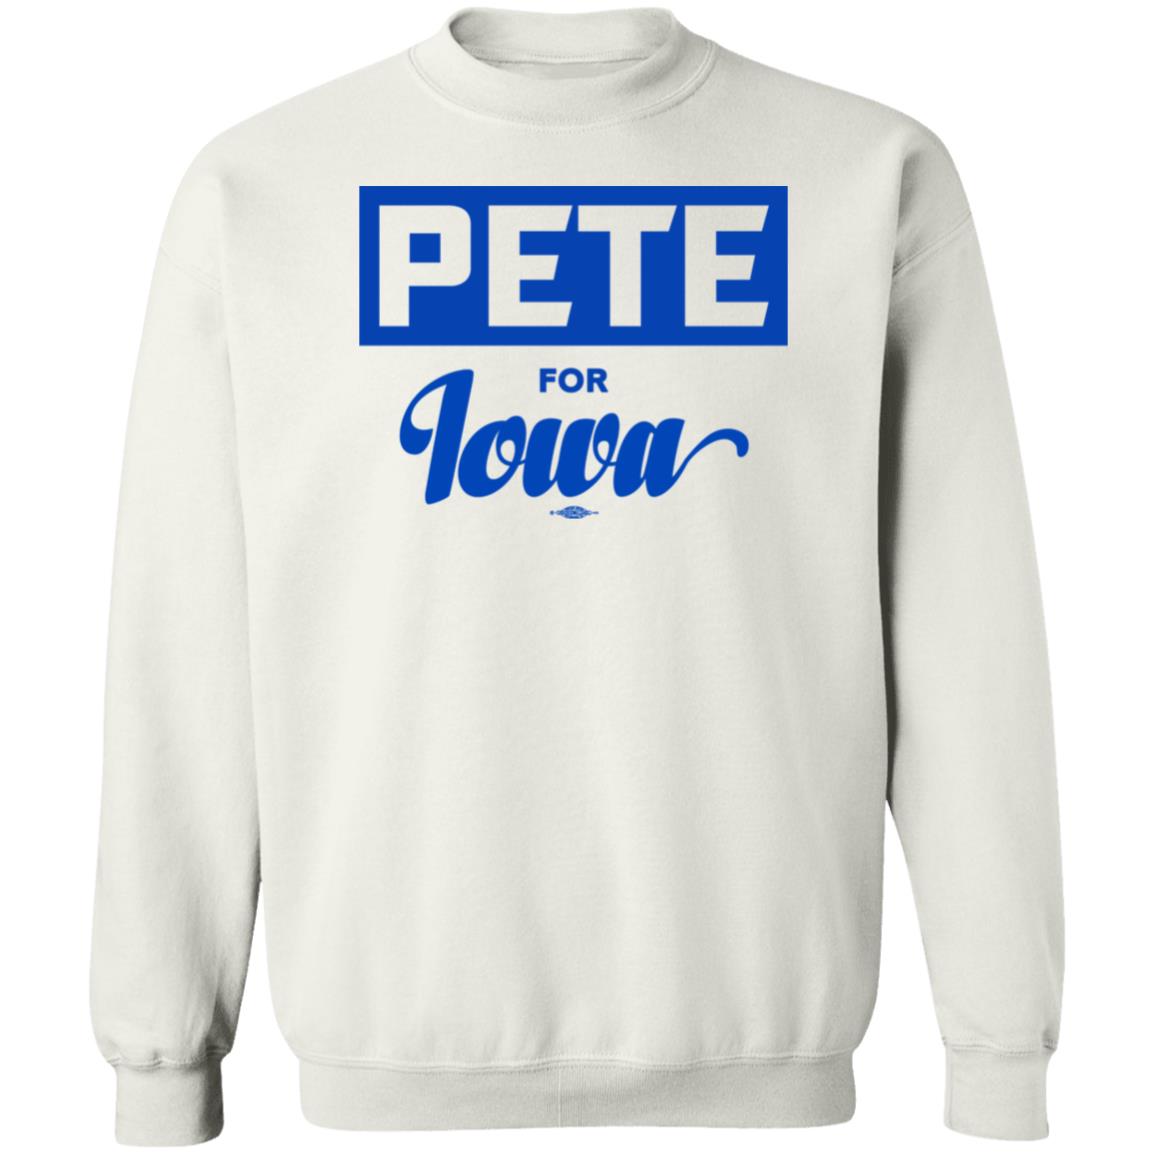 Pete For Iowa Shirt Panetory – Graphic Design Apparel &Amp; Accessories Online